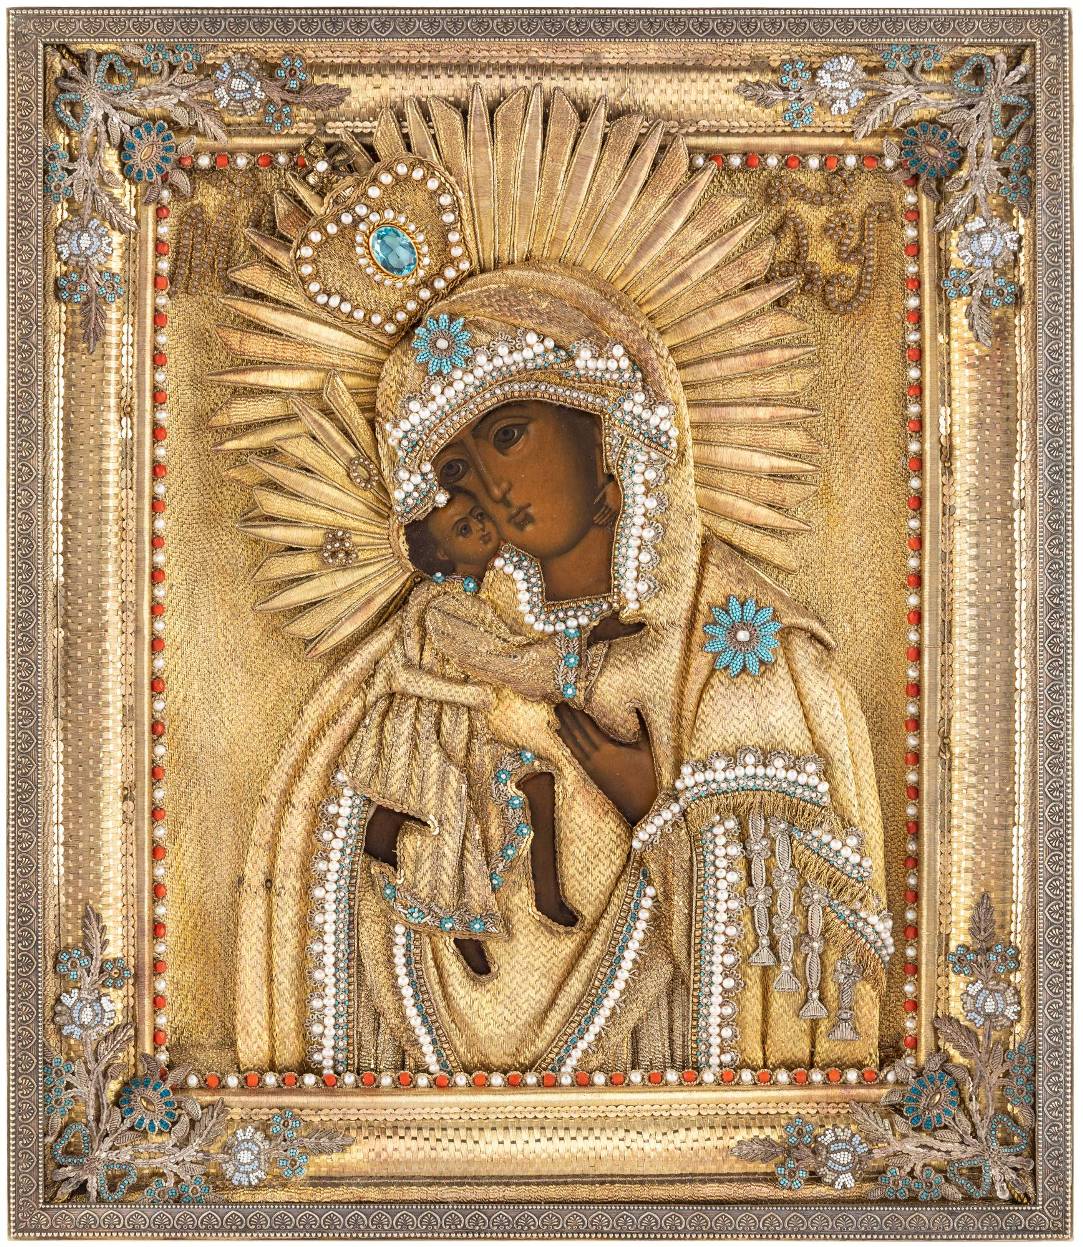 The Feodorovskaya icon of the Mother of God